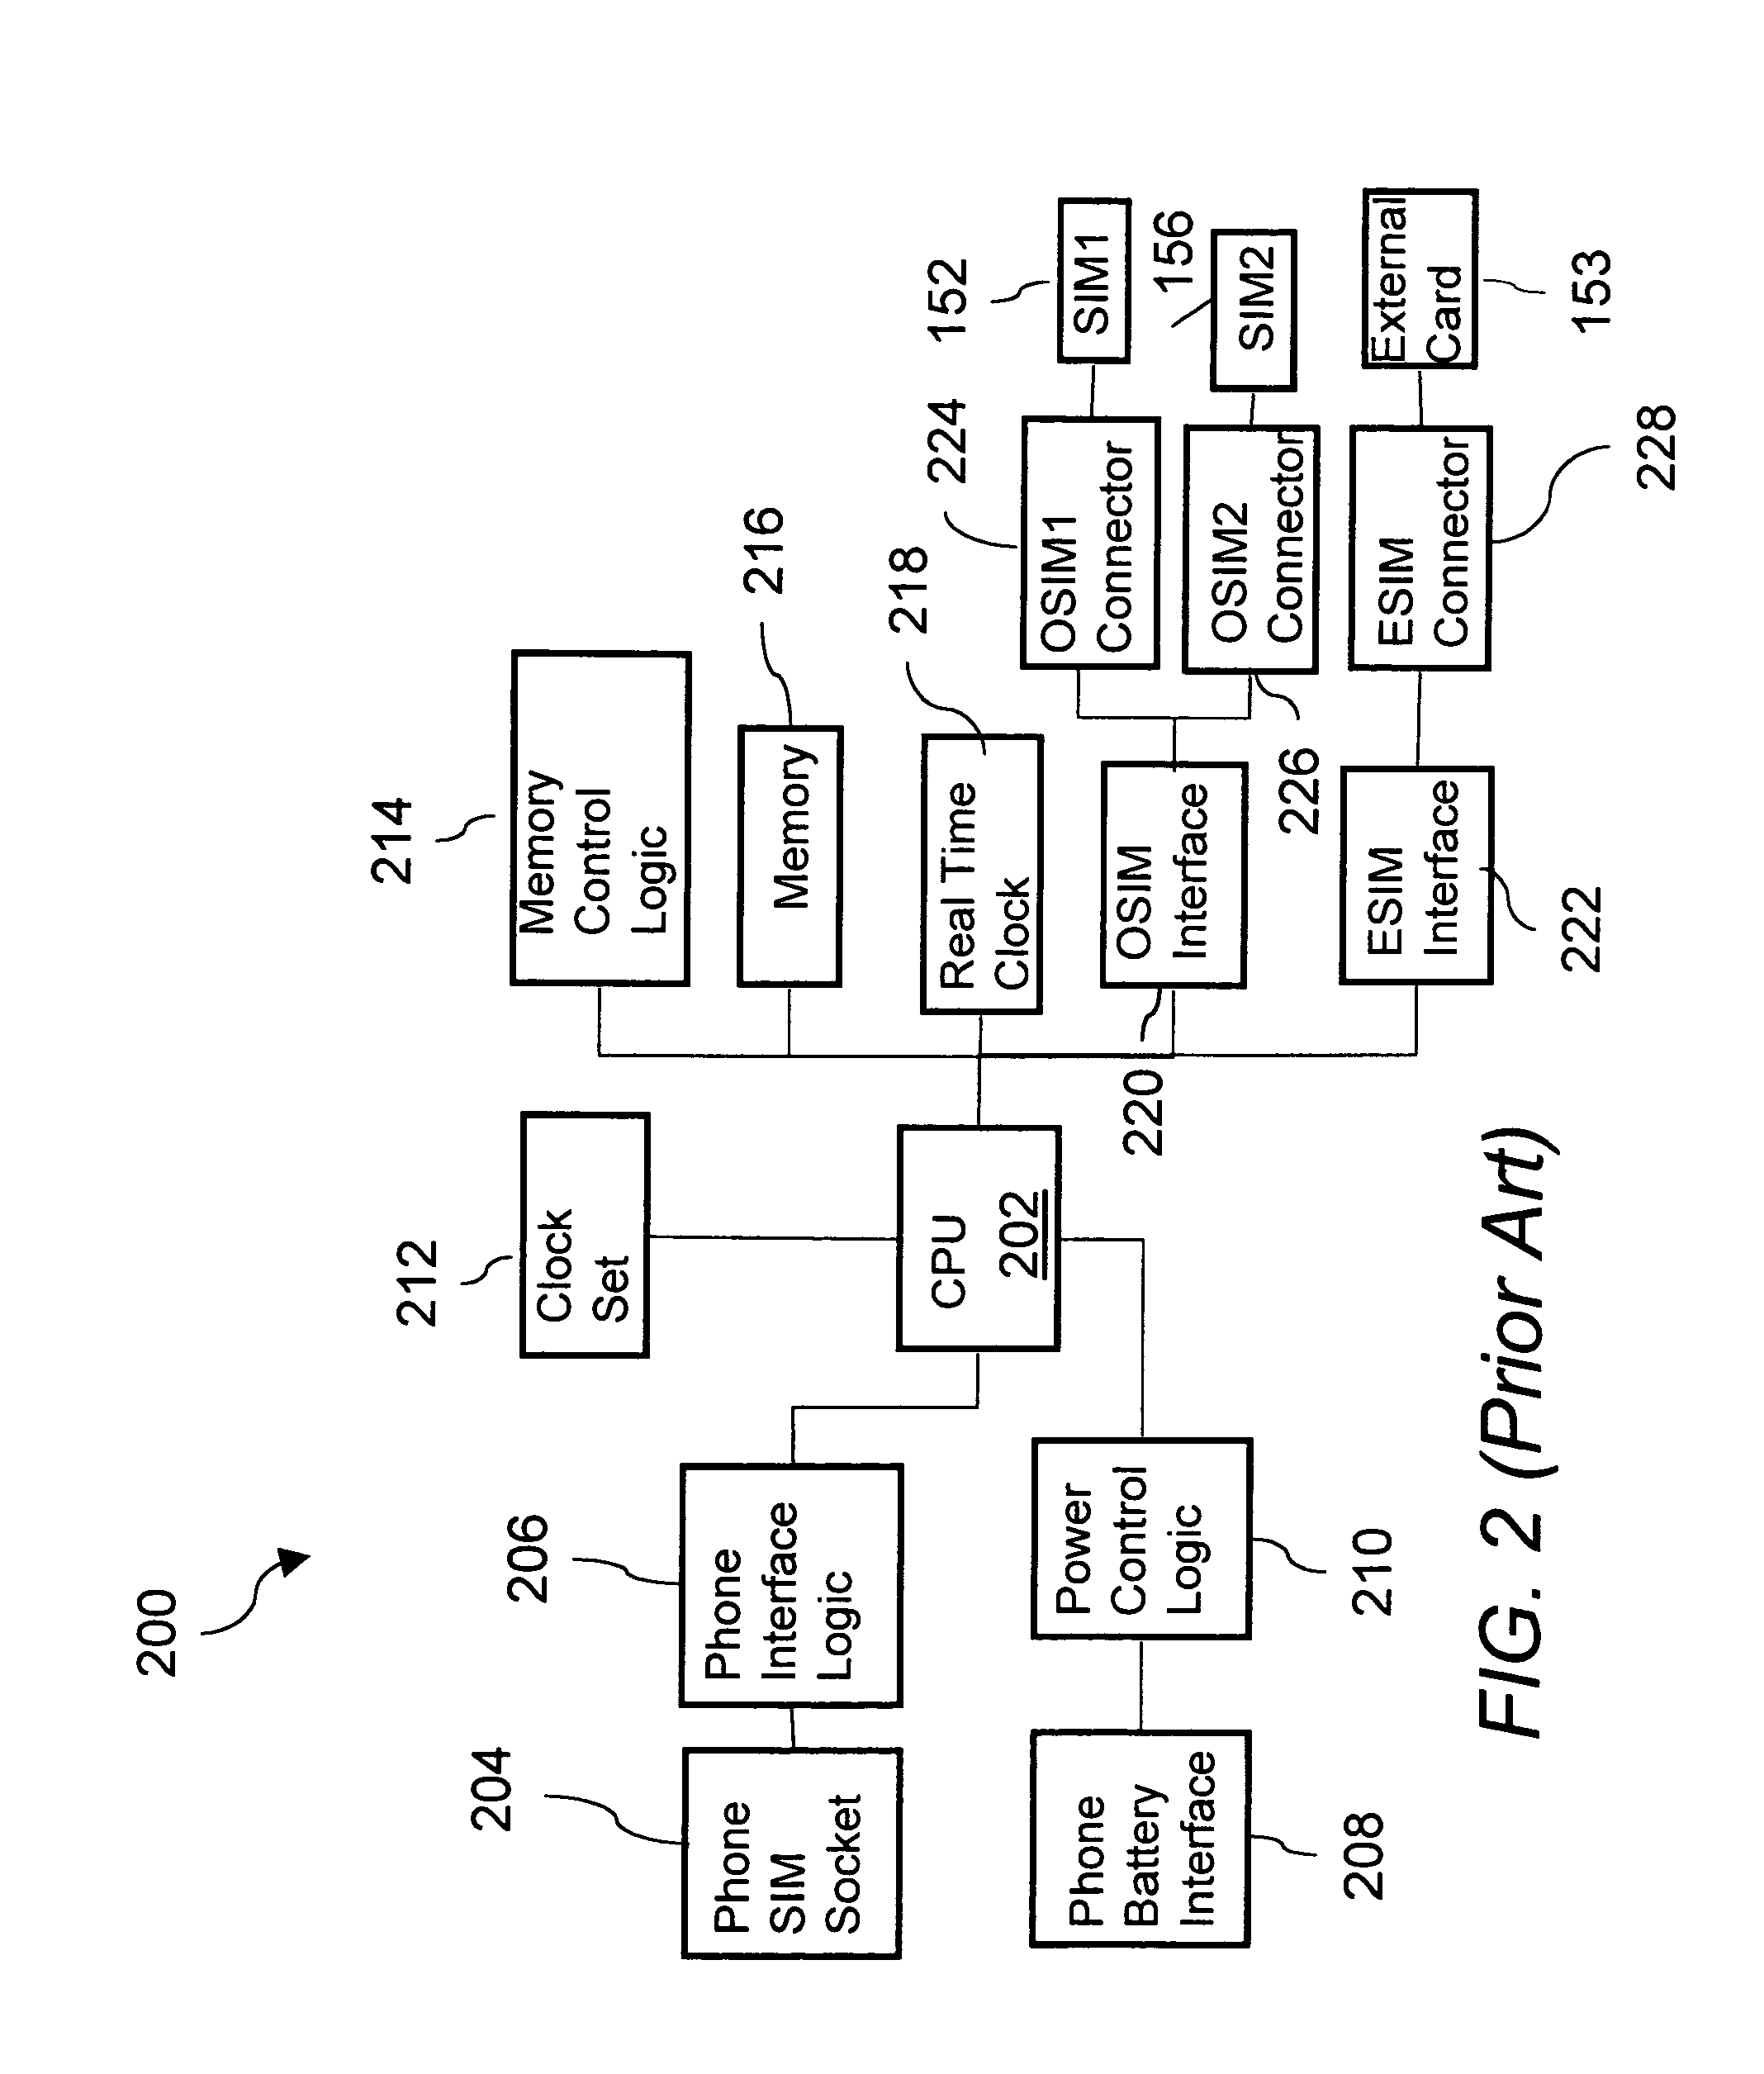 Mobile communication device equipped with a magnetic stripe reader